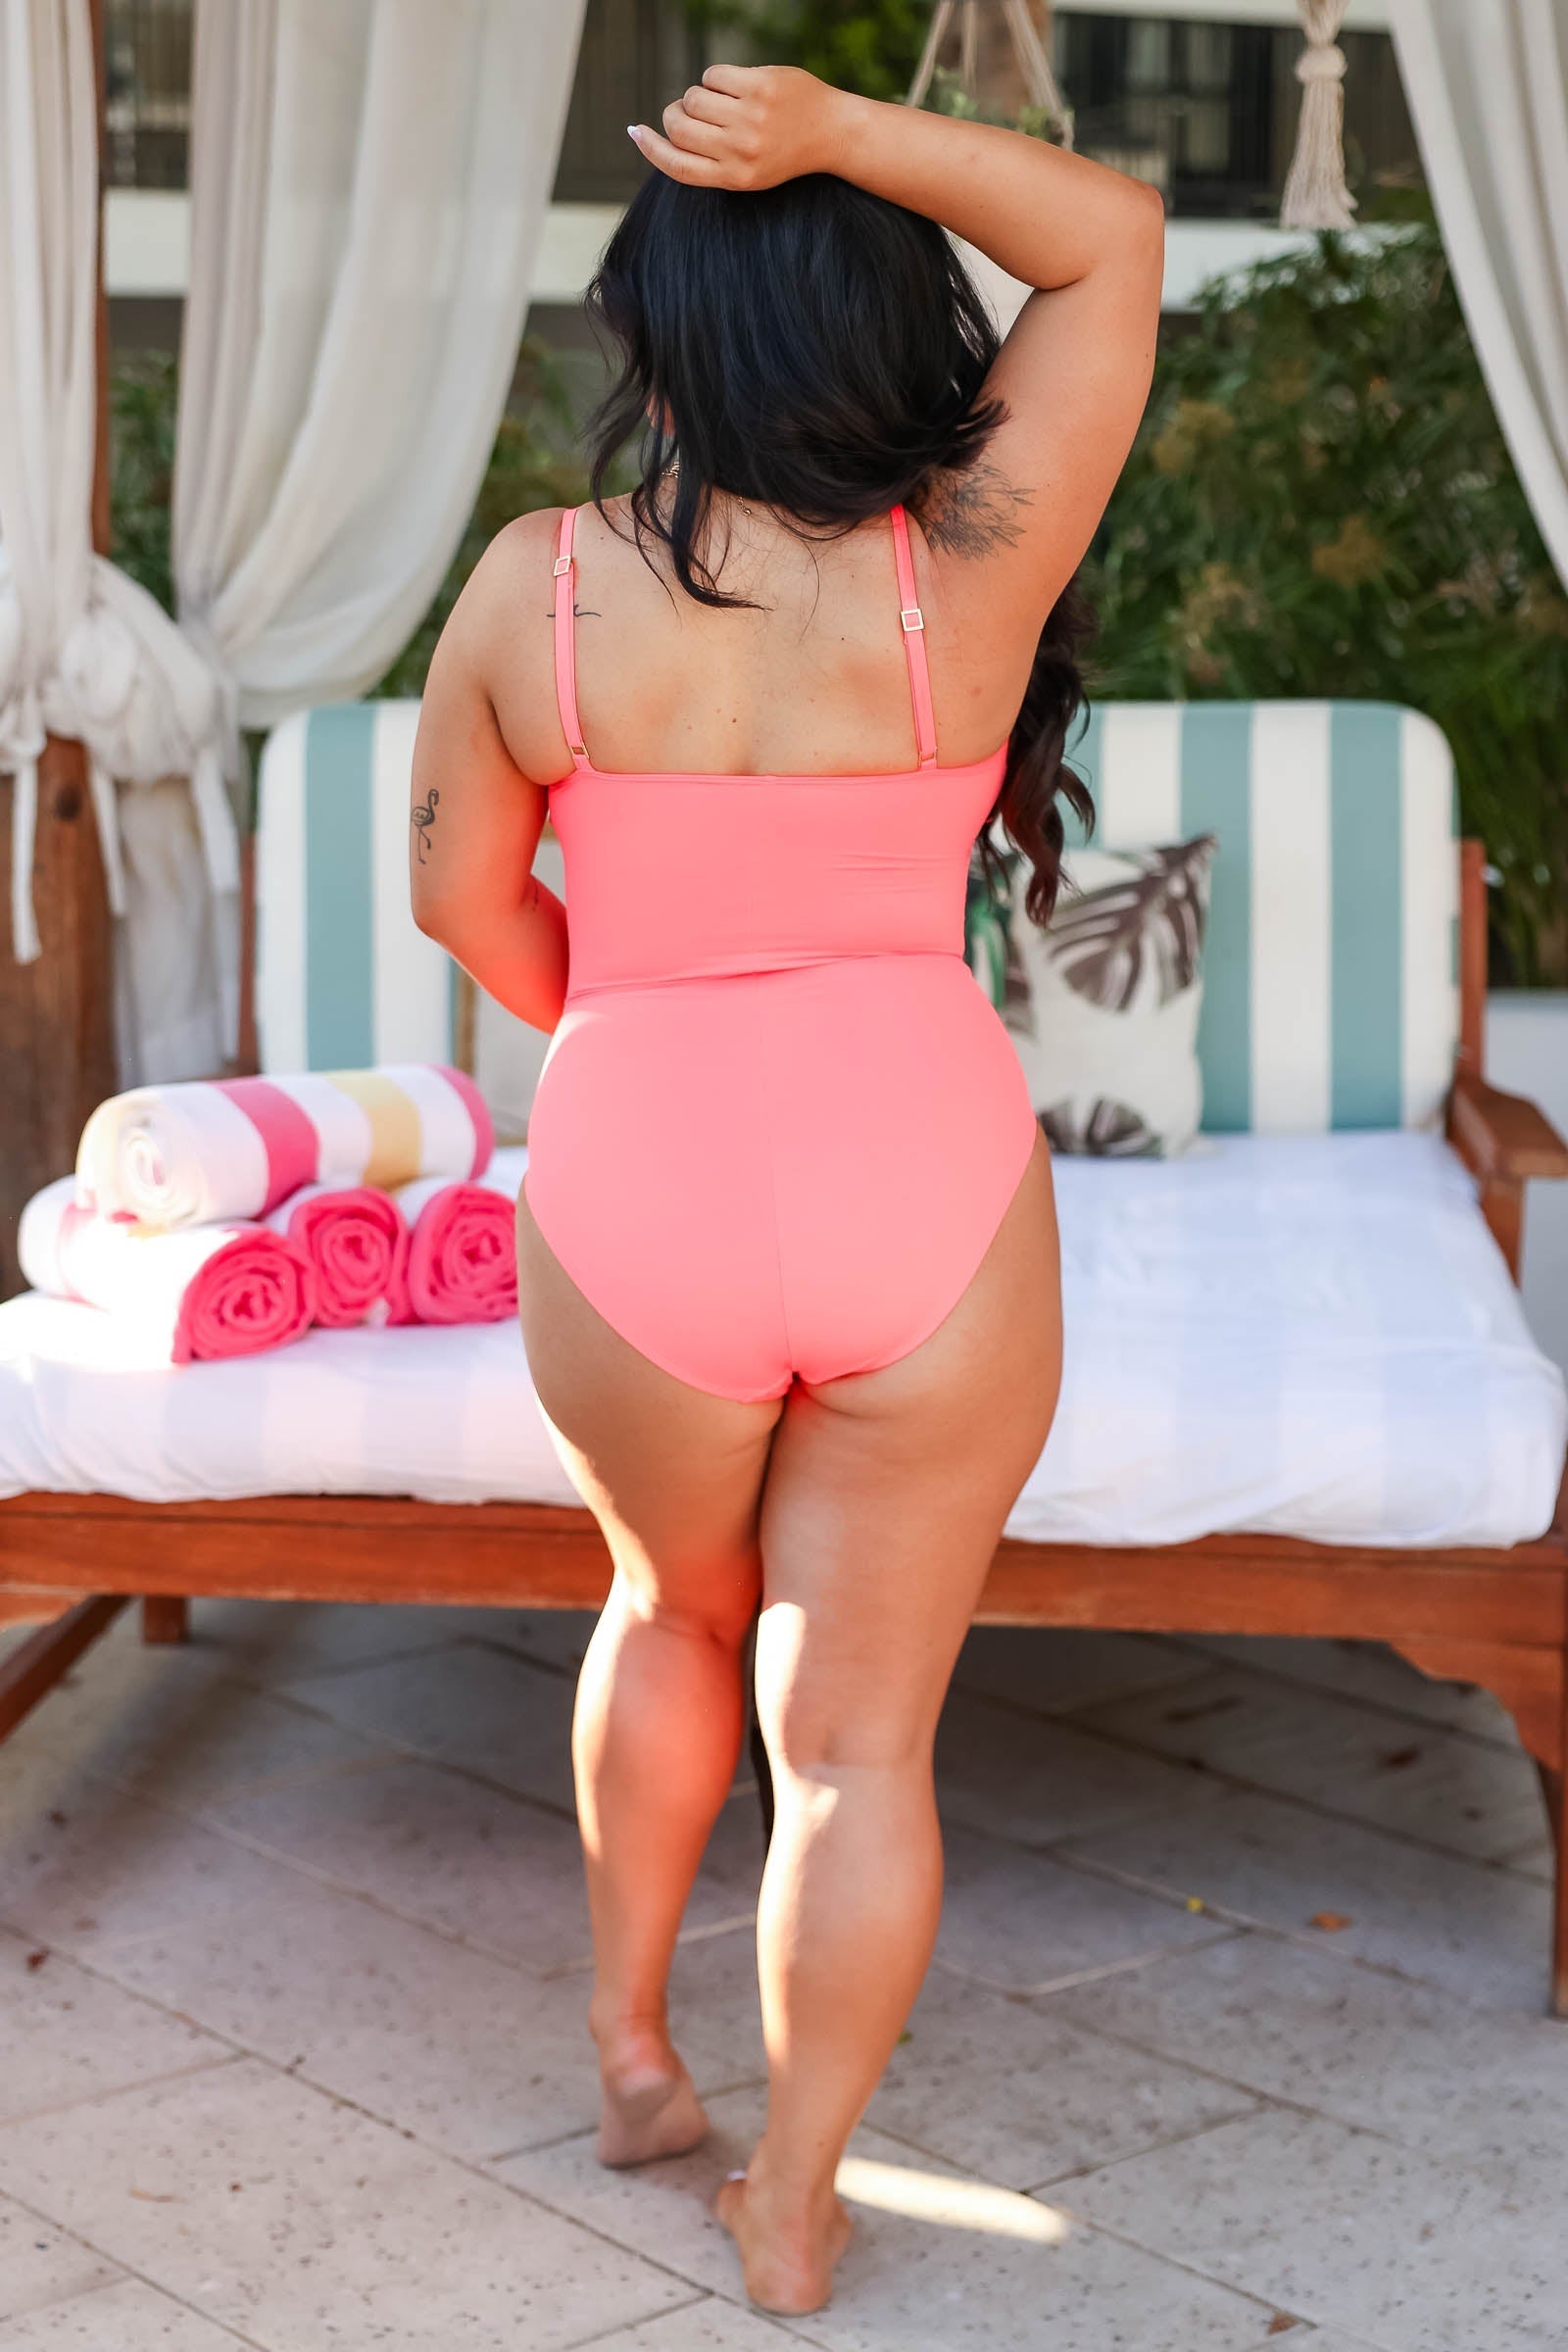 Island Goddess Lingerie One Piece - Hot Coral - FINAL SALE